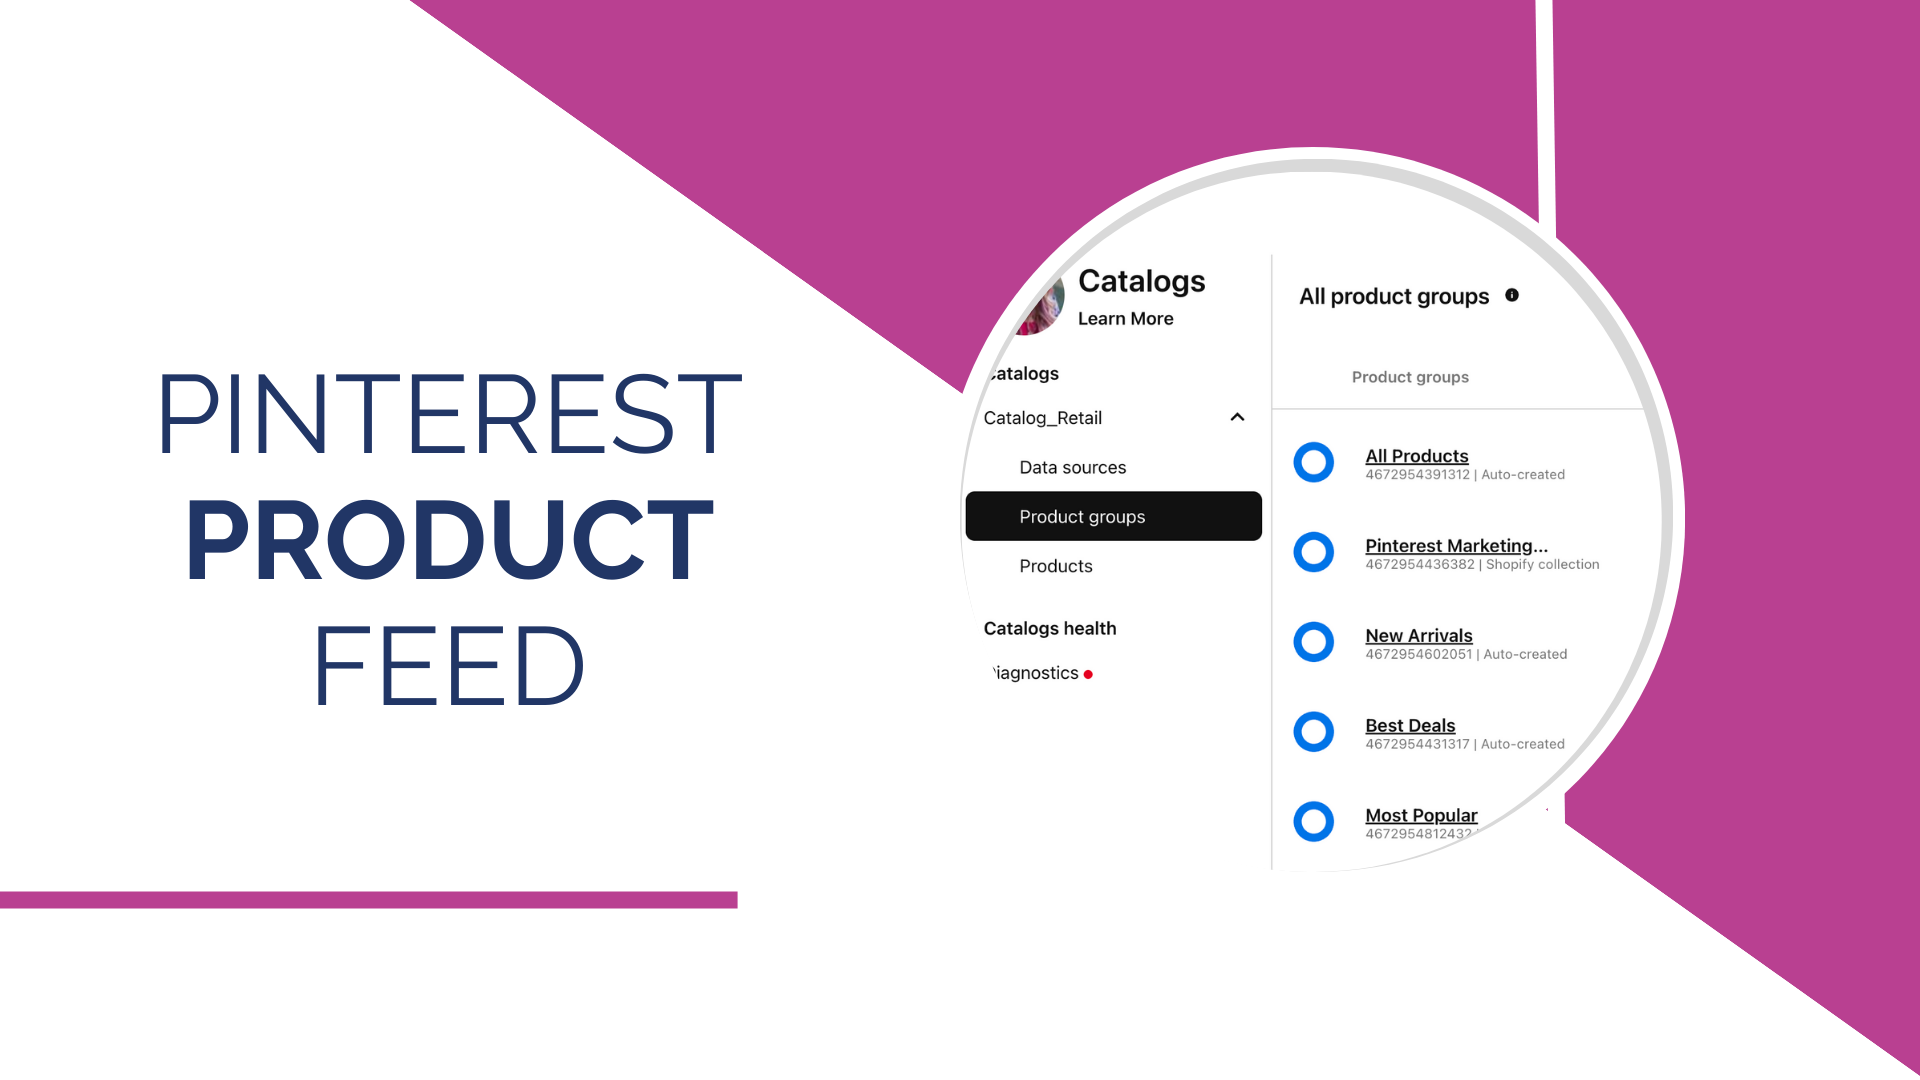 How to Optimize Your Pinterest Product Feed as a Verified Merchant on Pinterest